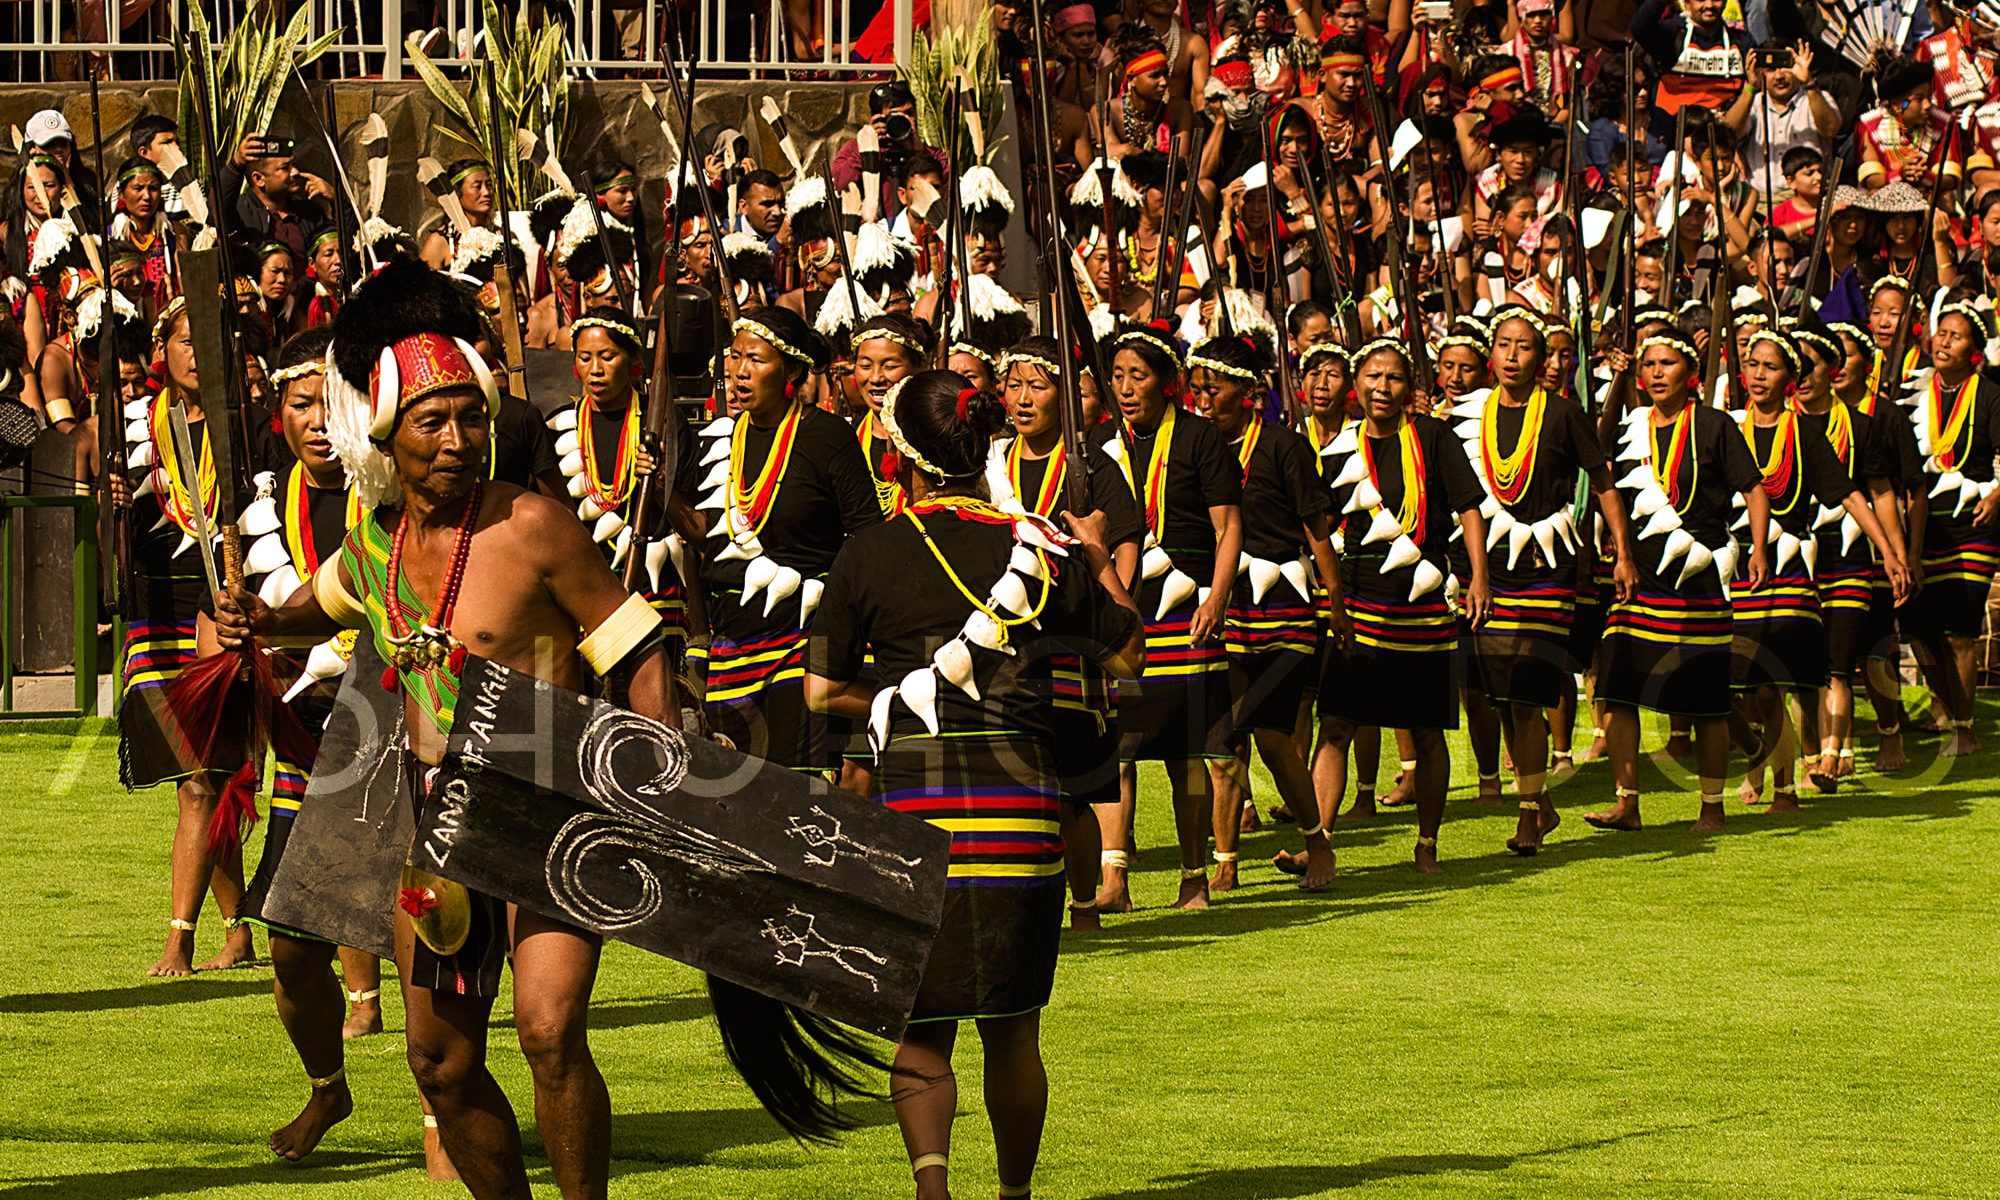 The colourful Hornbill Festival begins with a parade starting from the arena of Kohima town to Kisama Heritage Village.